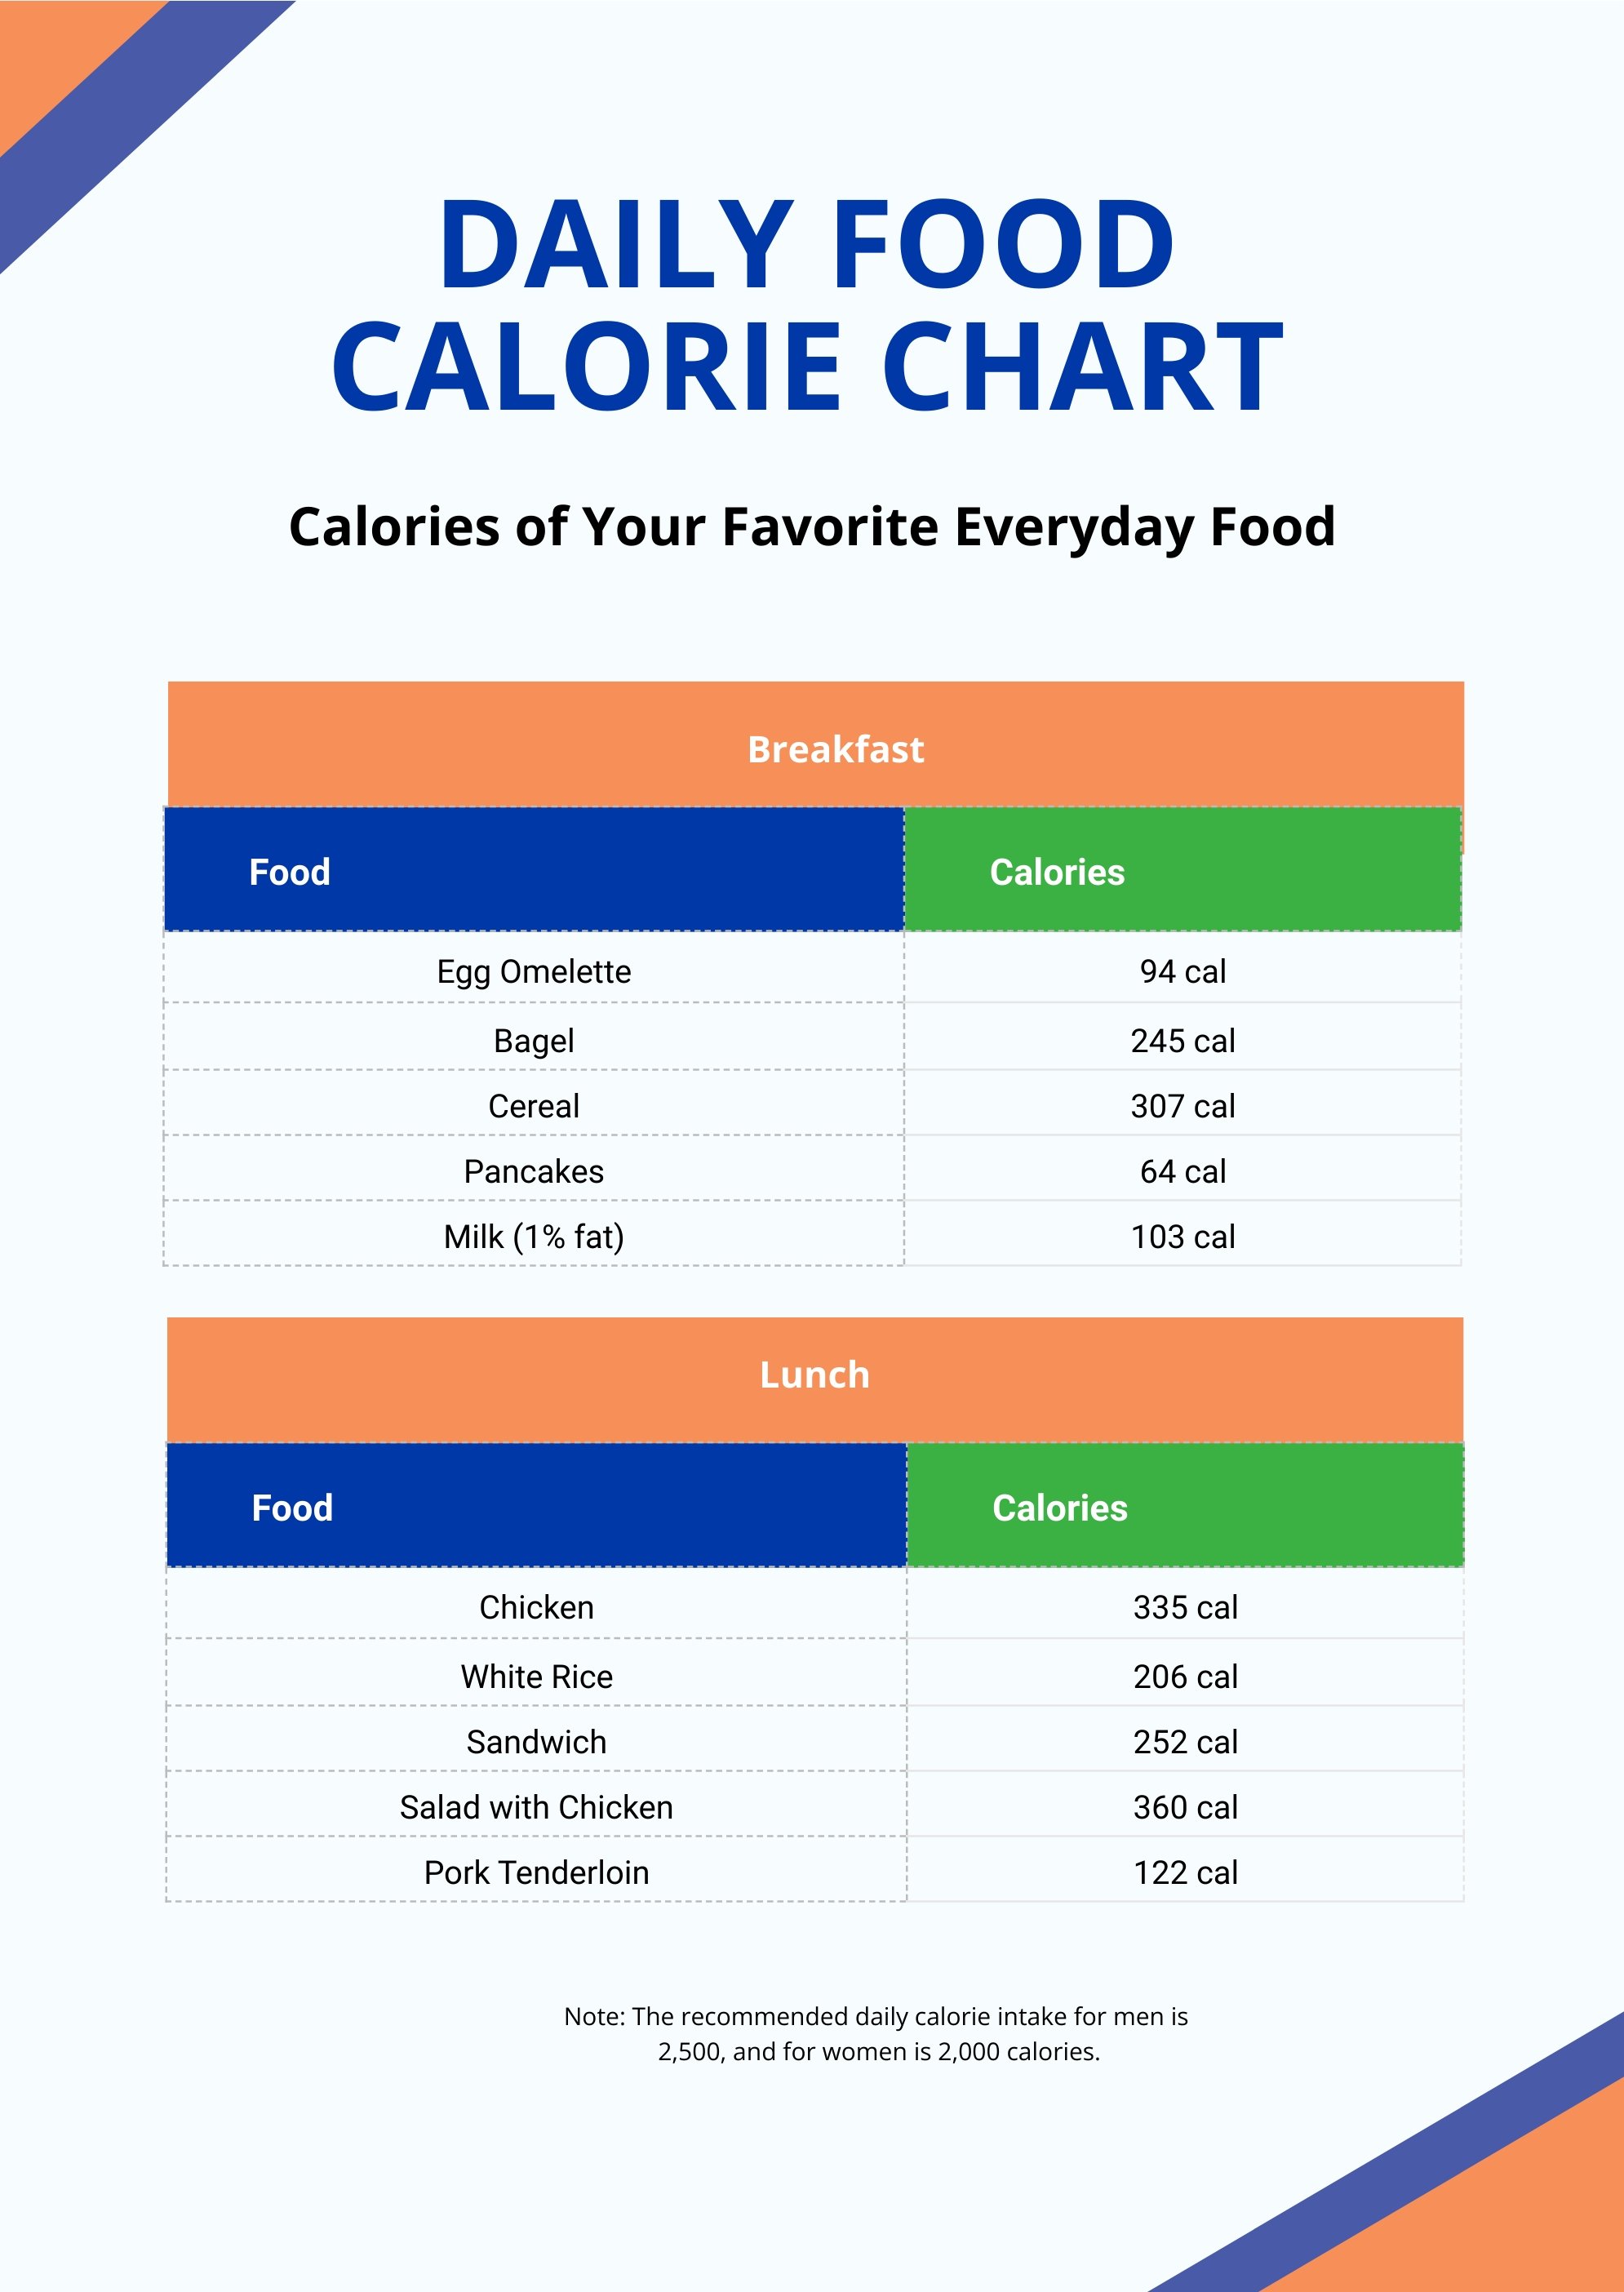 Daily Food Calorie Chart